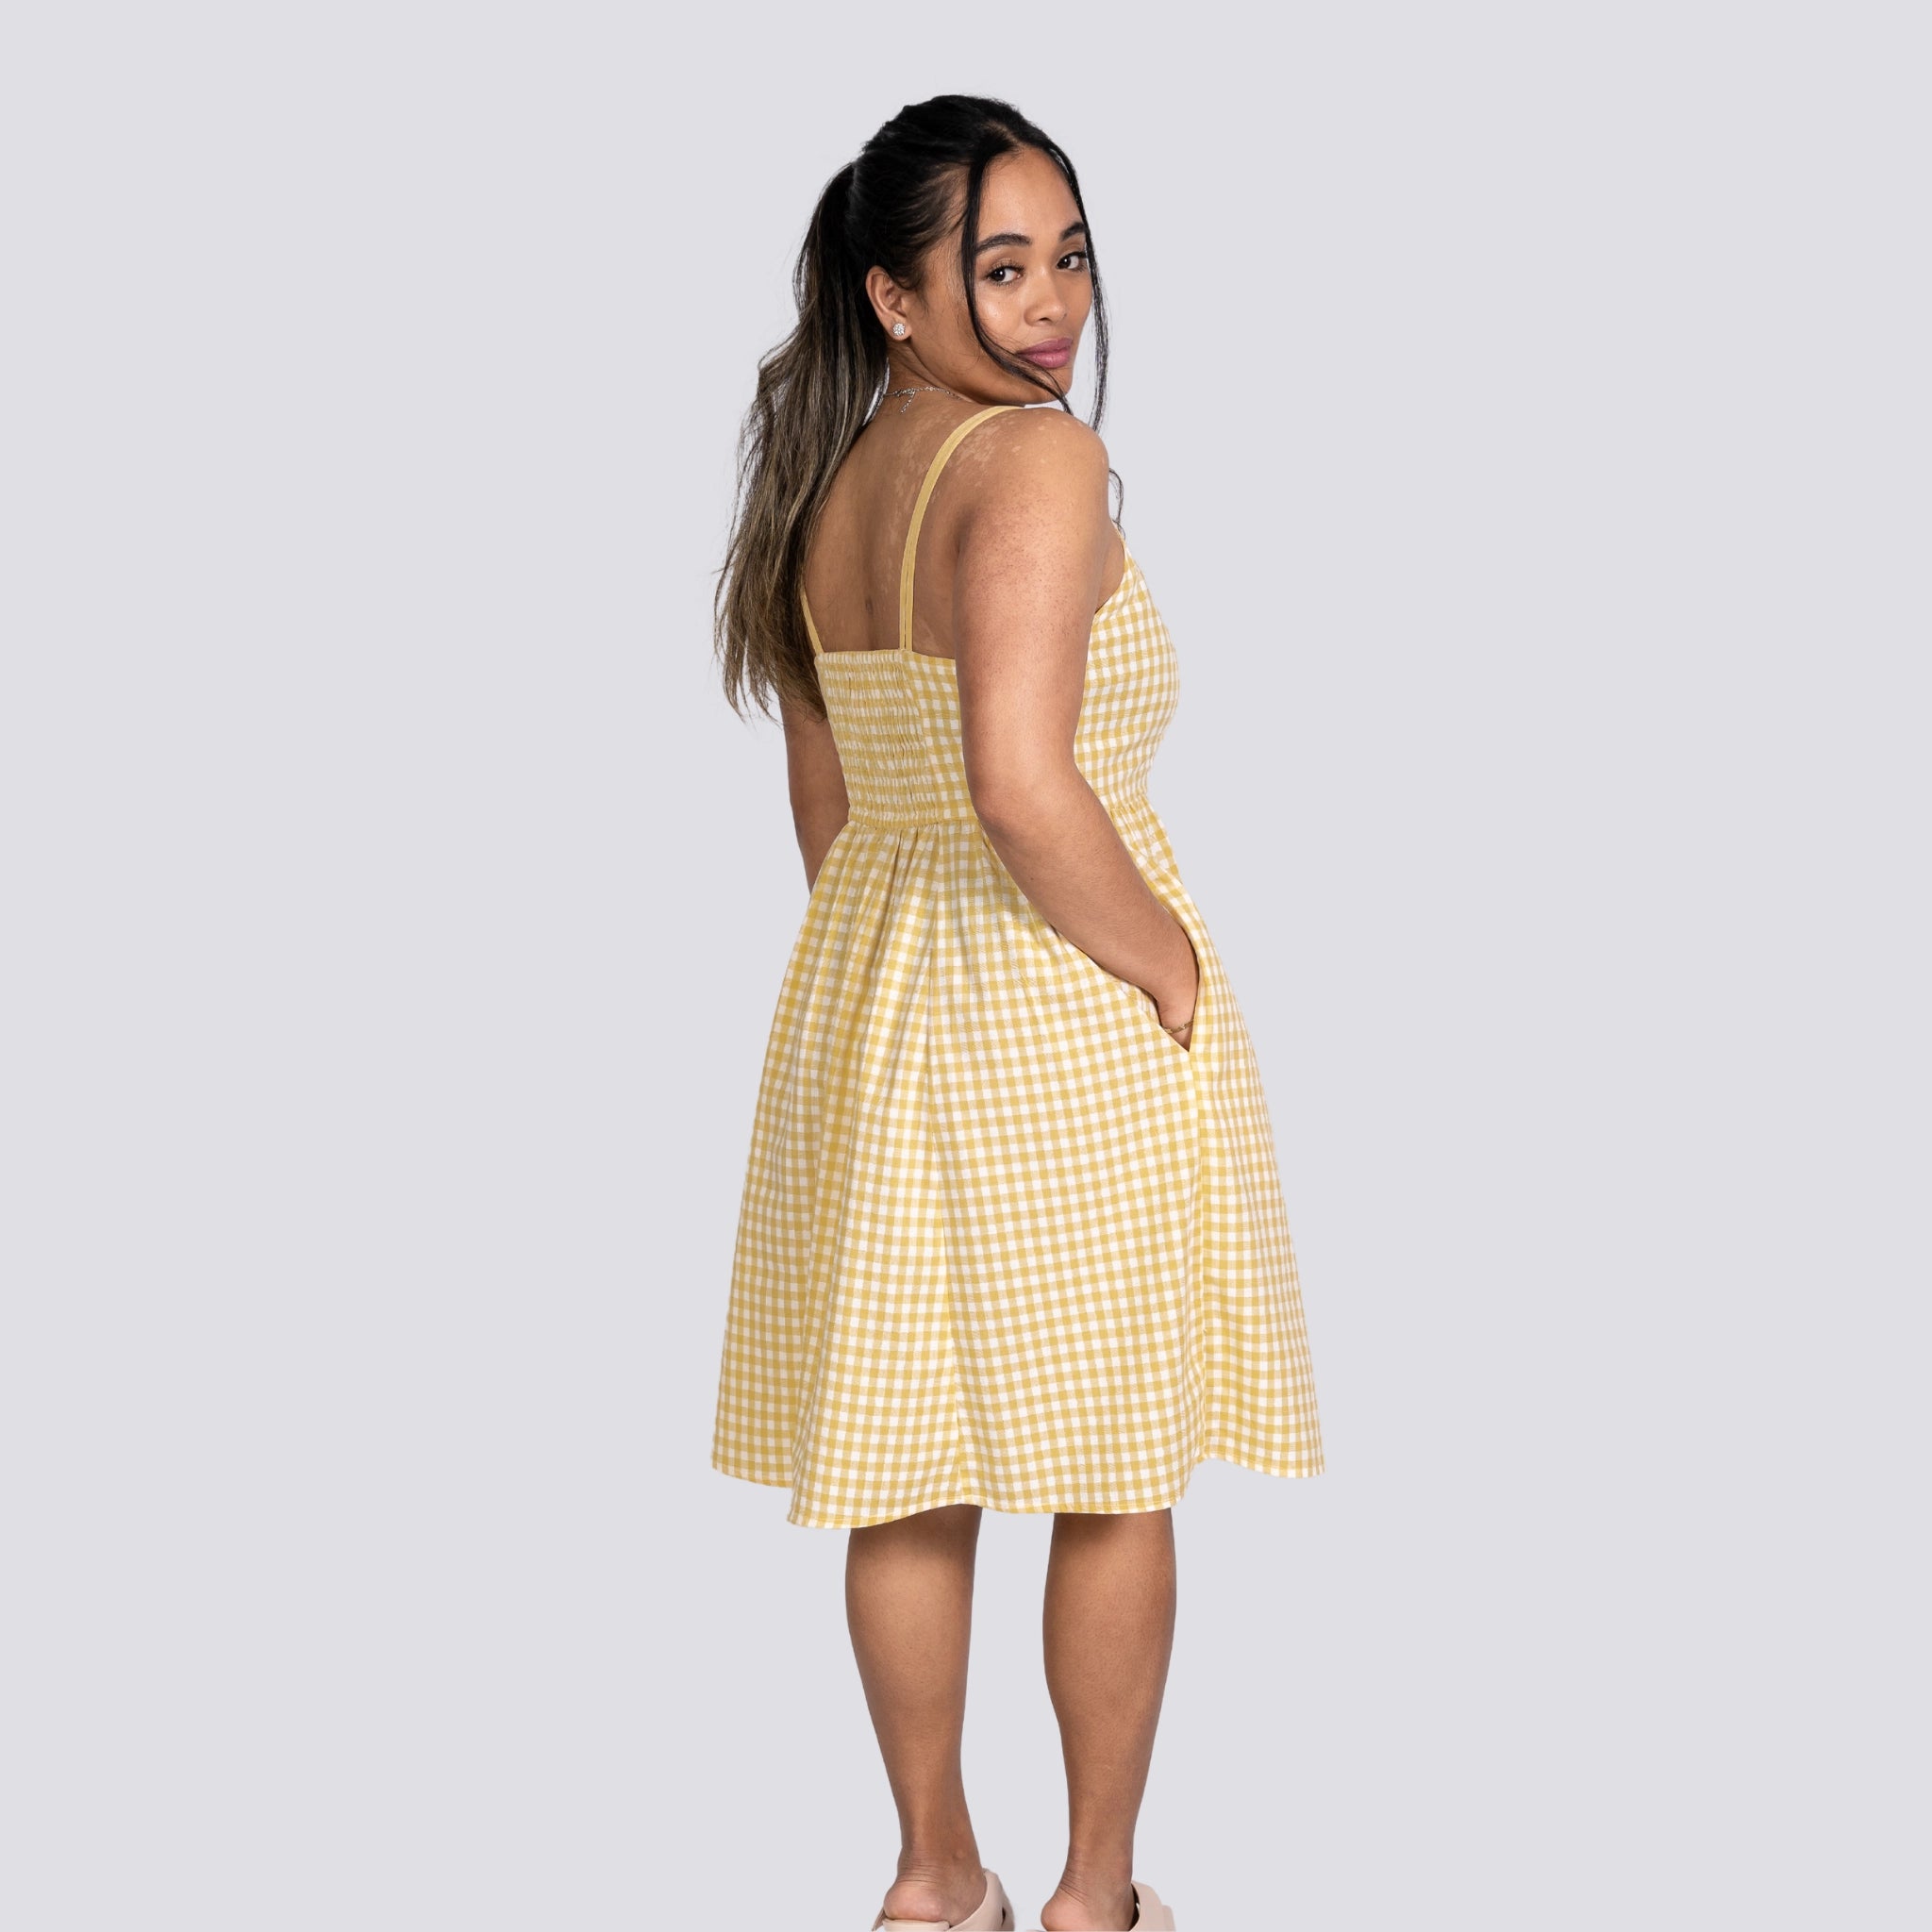 A woman in a Sunshine Chic Yellow Plaid Cotton Mini Dress by Karee looks over her shoulder, standing against a grey background.